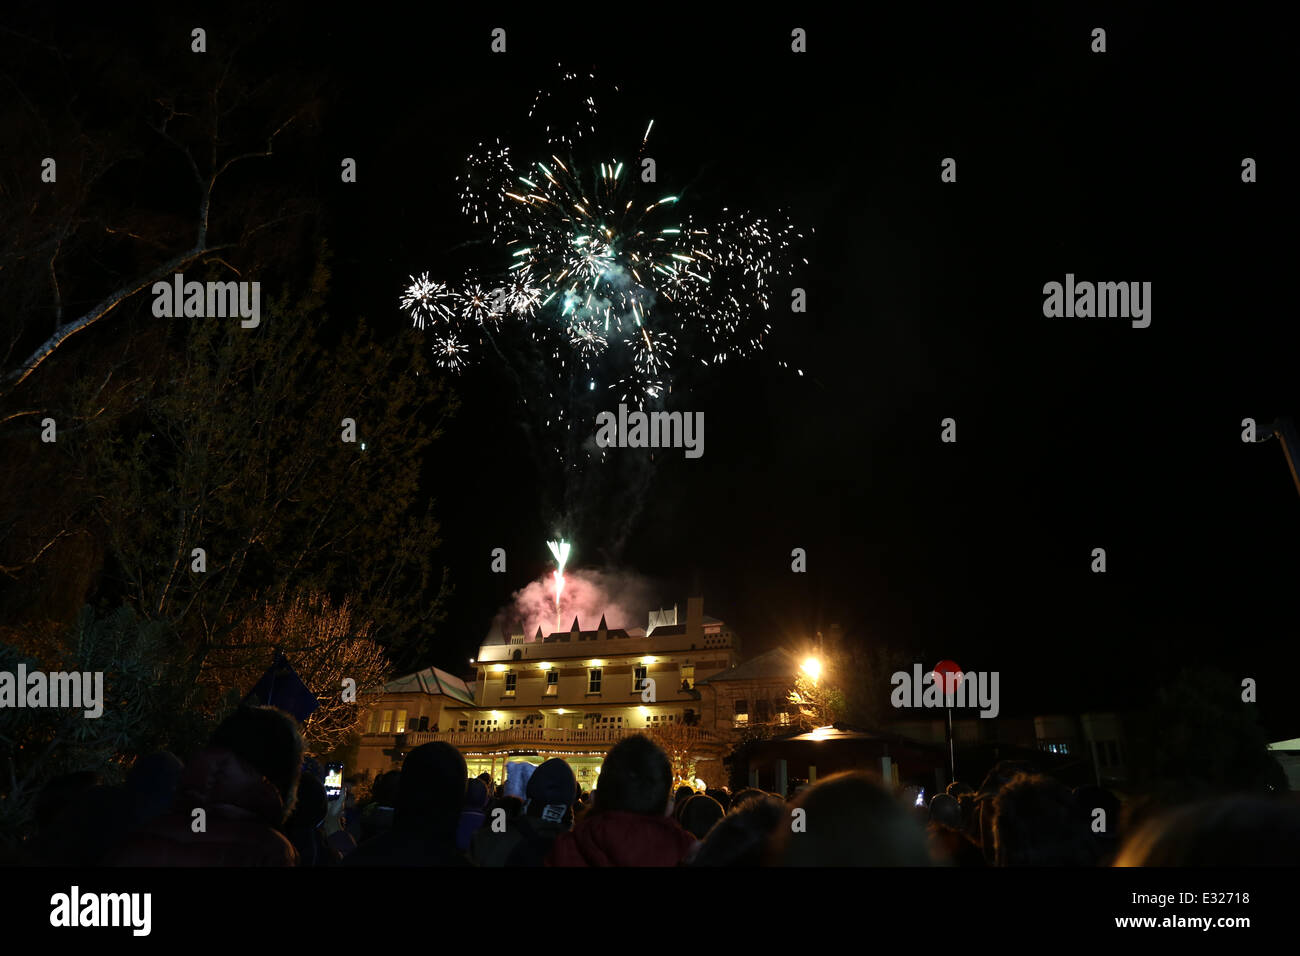 Katoomba, Blue Mountains, NSW, Australia. 21 June 2014. Crowds gather outside the Carrington Hotel in Katoomba in the Blue Mountains to watch the fireworks at the end of the Winter Magic Festival. Copyright Credit:  2014 Richard Milnes/Alamy Live News Stock Photo